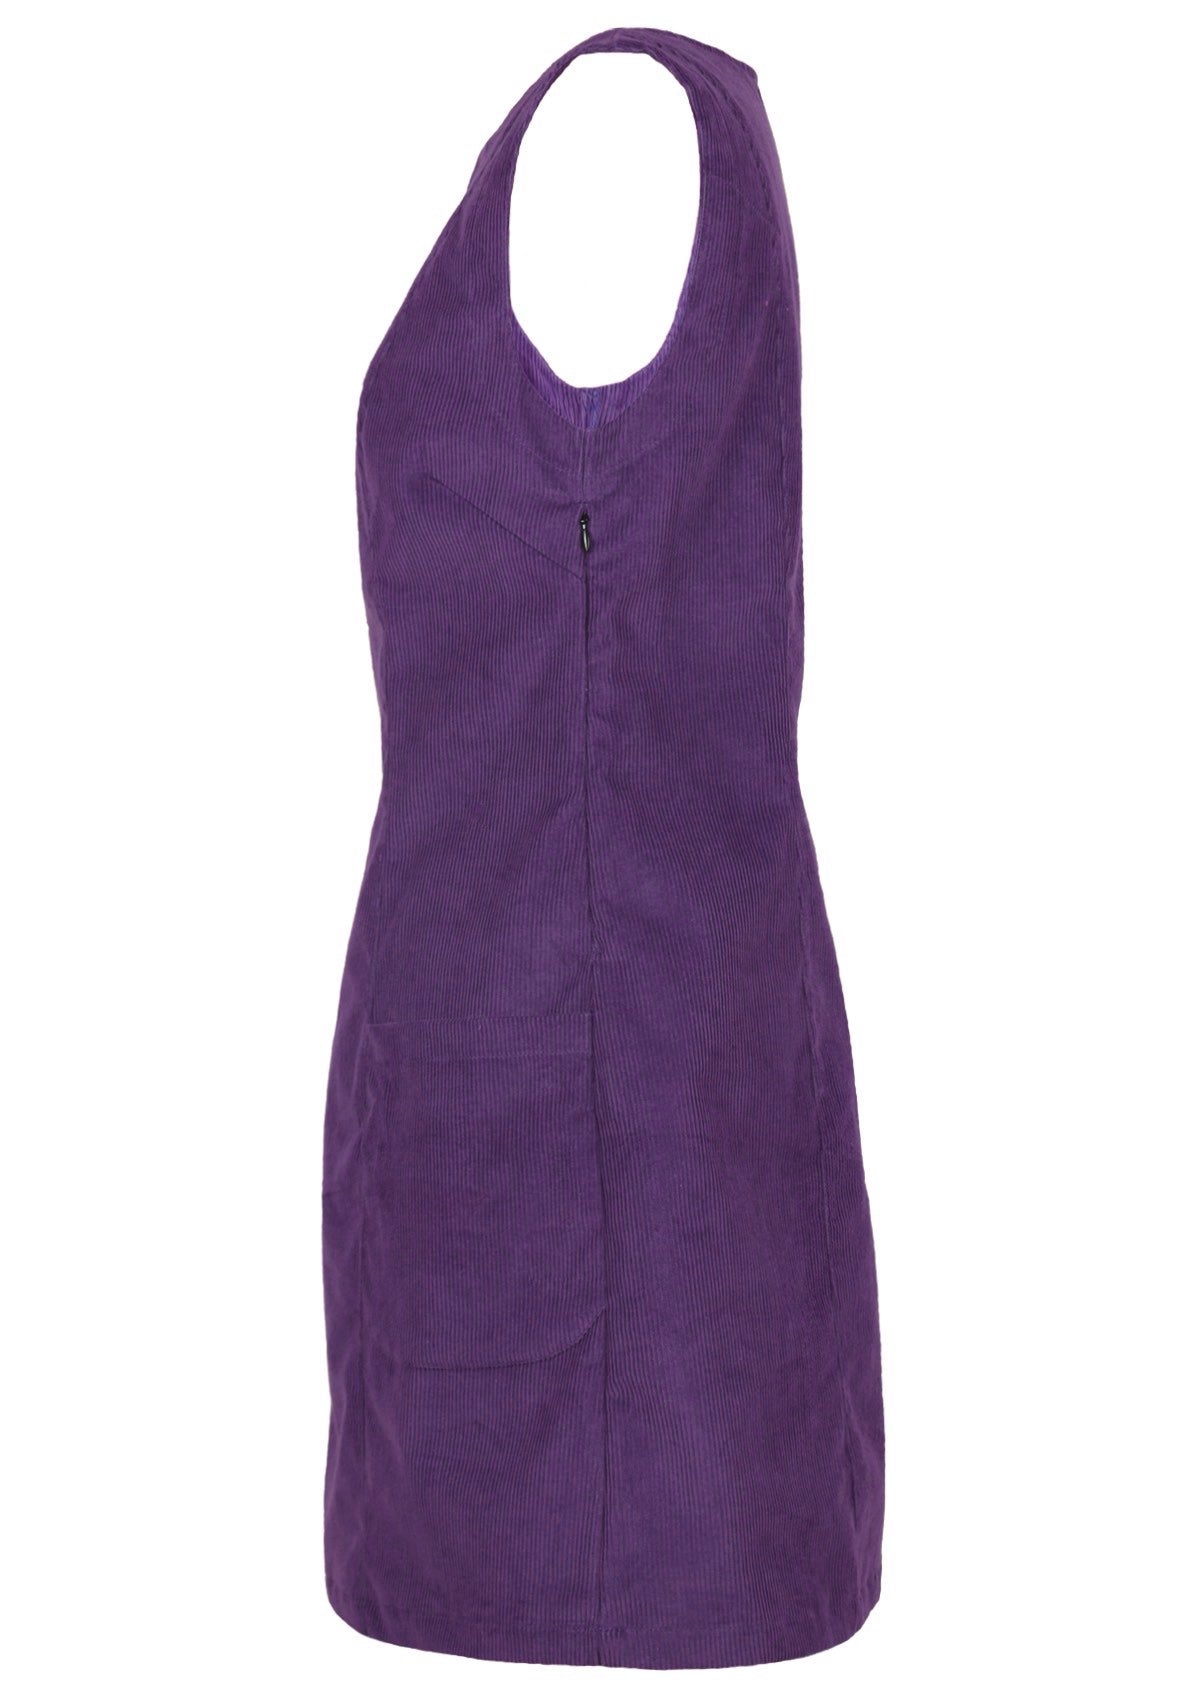 Purple cotton tunic has a side zip and pockets. 